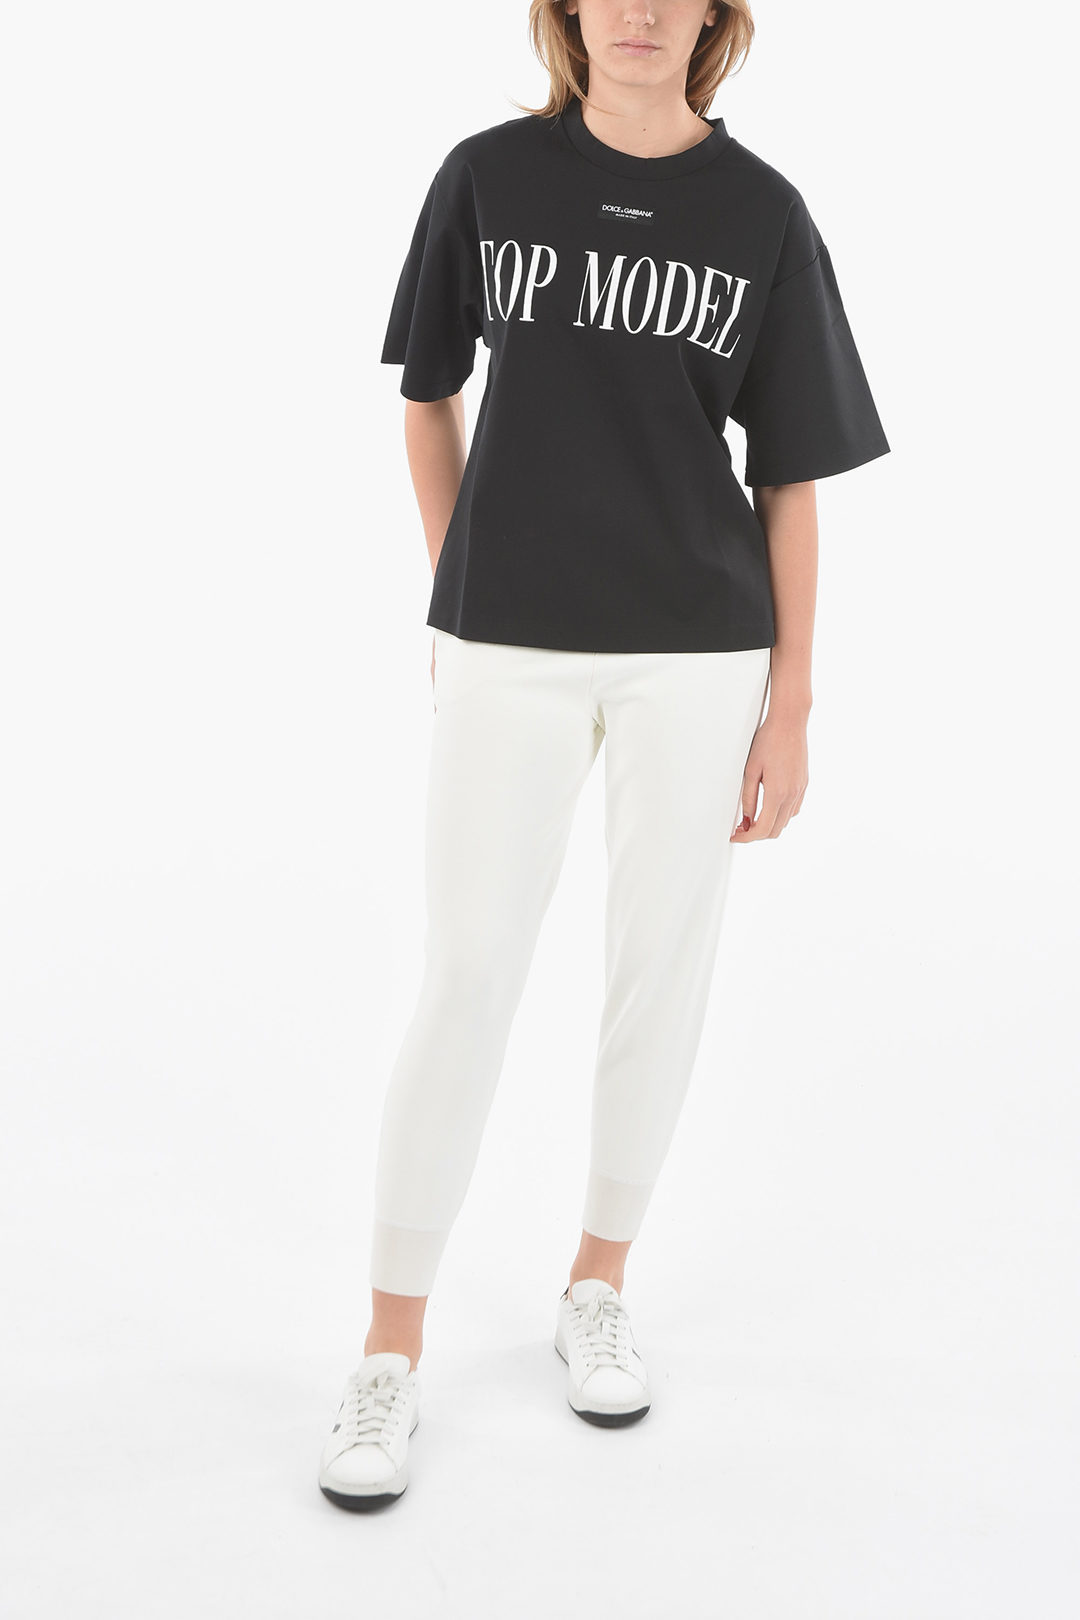 Dolce & Gabbana Crewneck TOP MODEL T-shirt with Lettering Print women -  Glamood Outlet